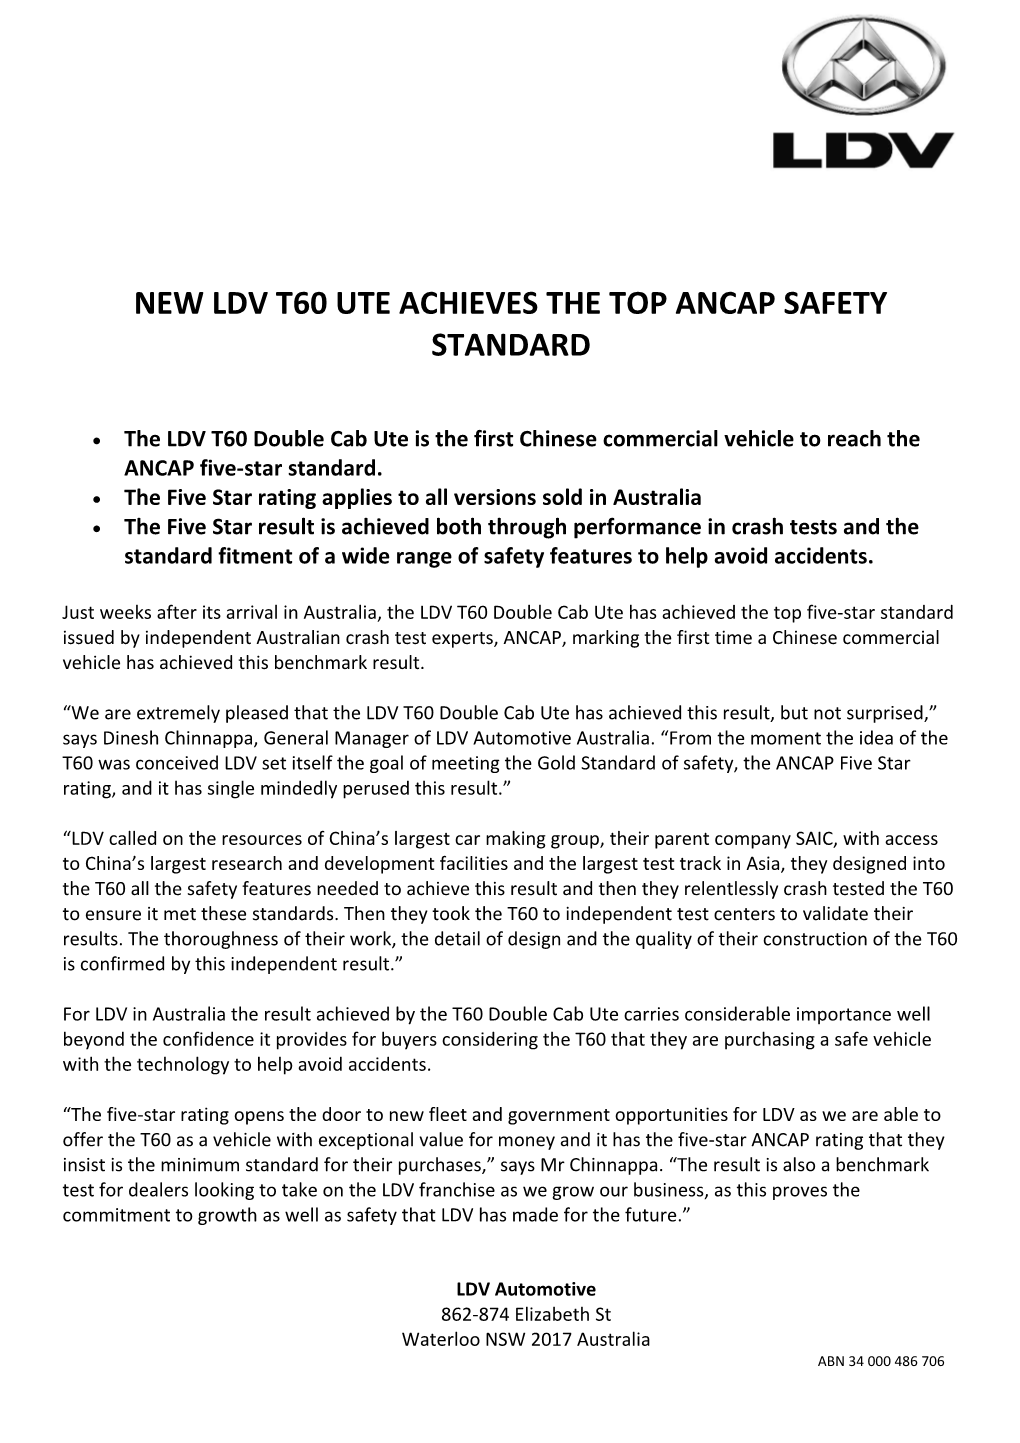 NEW LDV T60 UTE ACHIEVES the TOP ANCAP SAFETY Standard